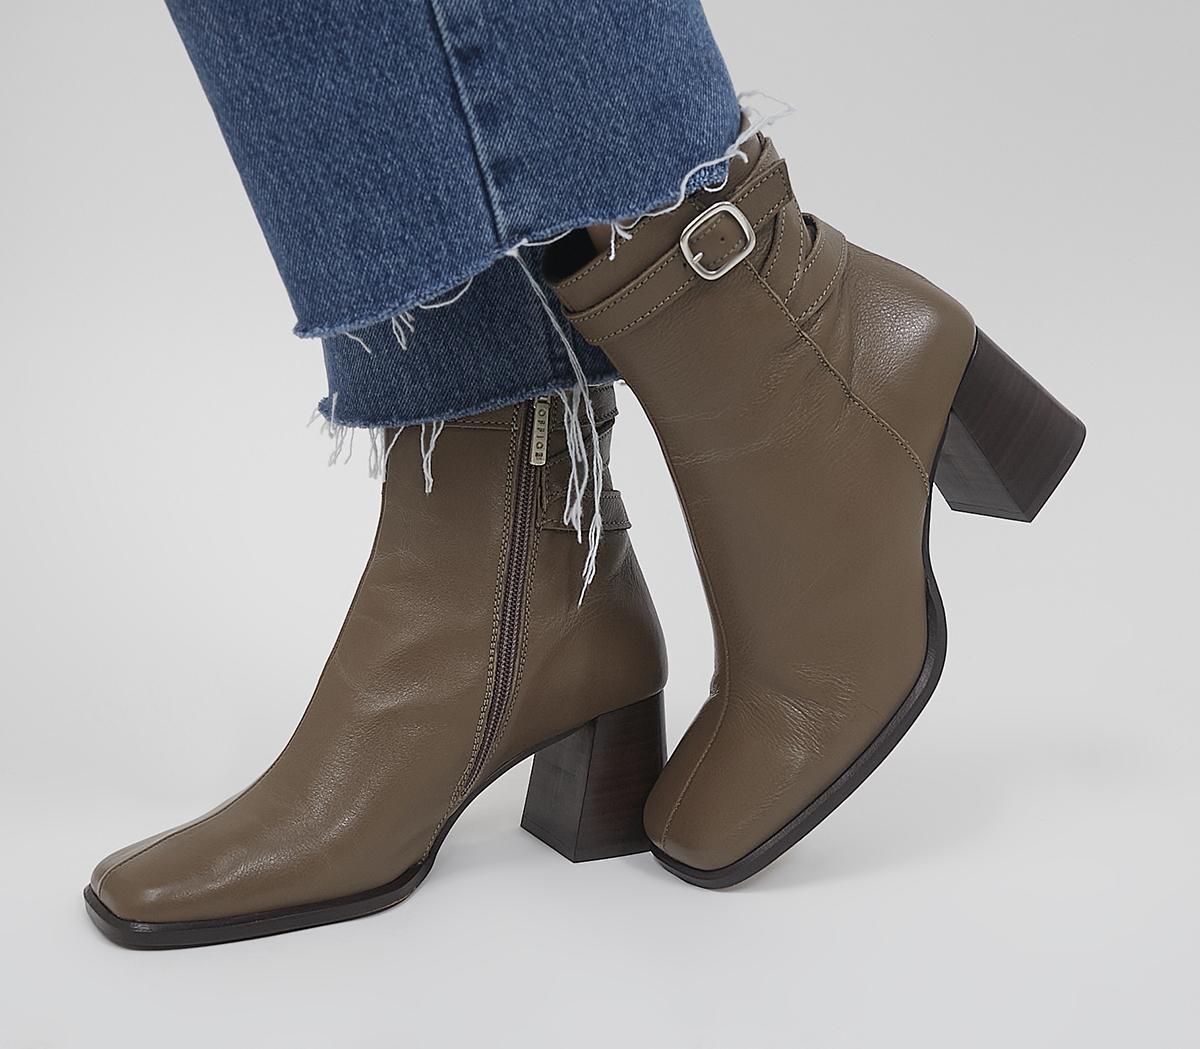 OfficeAlicia Multi Strap Heeled BootsTaupe Leather